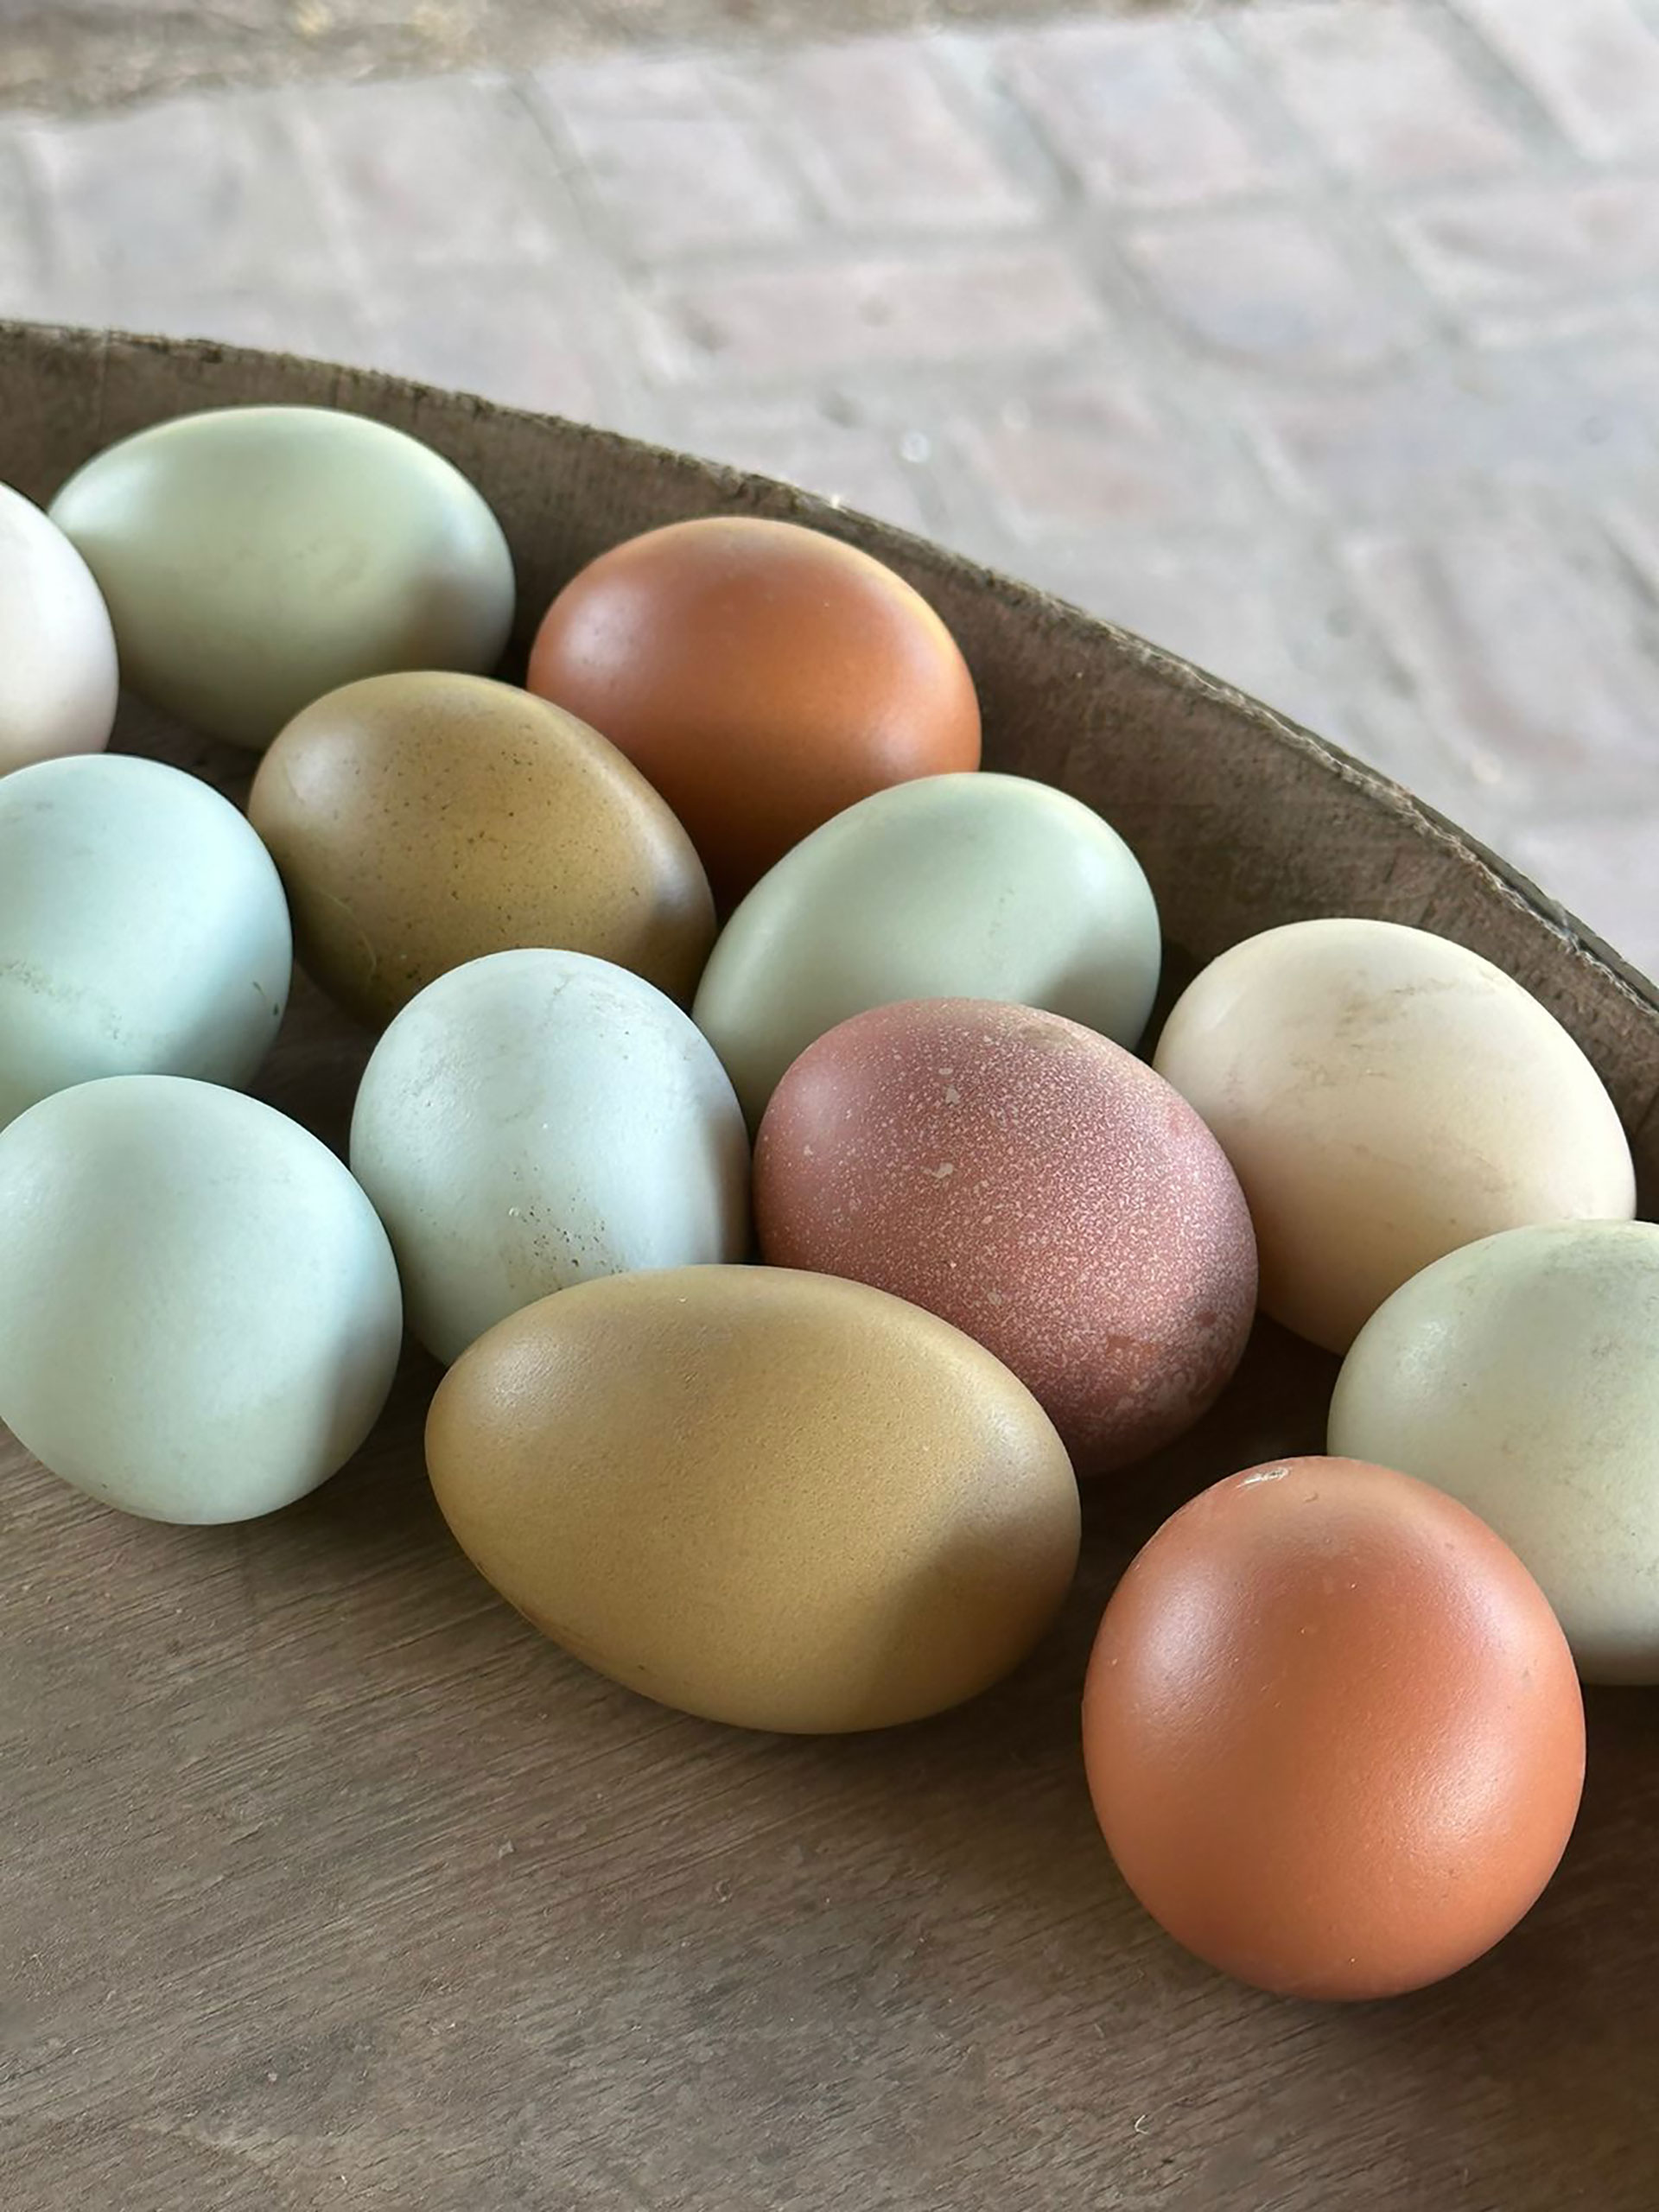 The light blue color present in chicken eggs amazes many